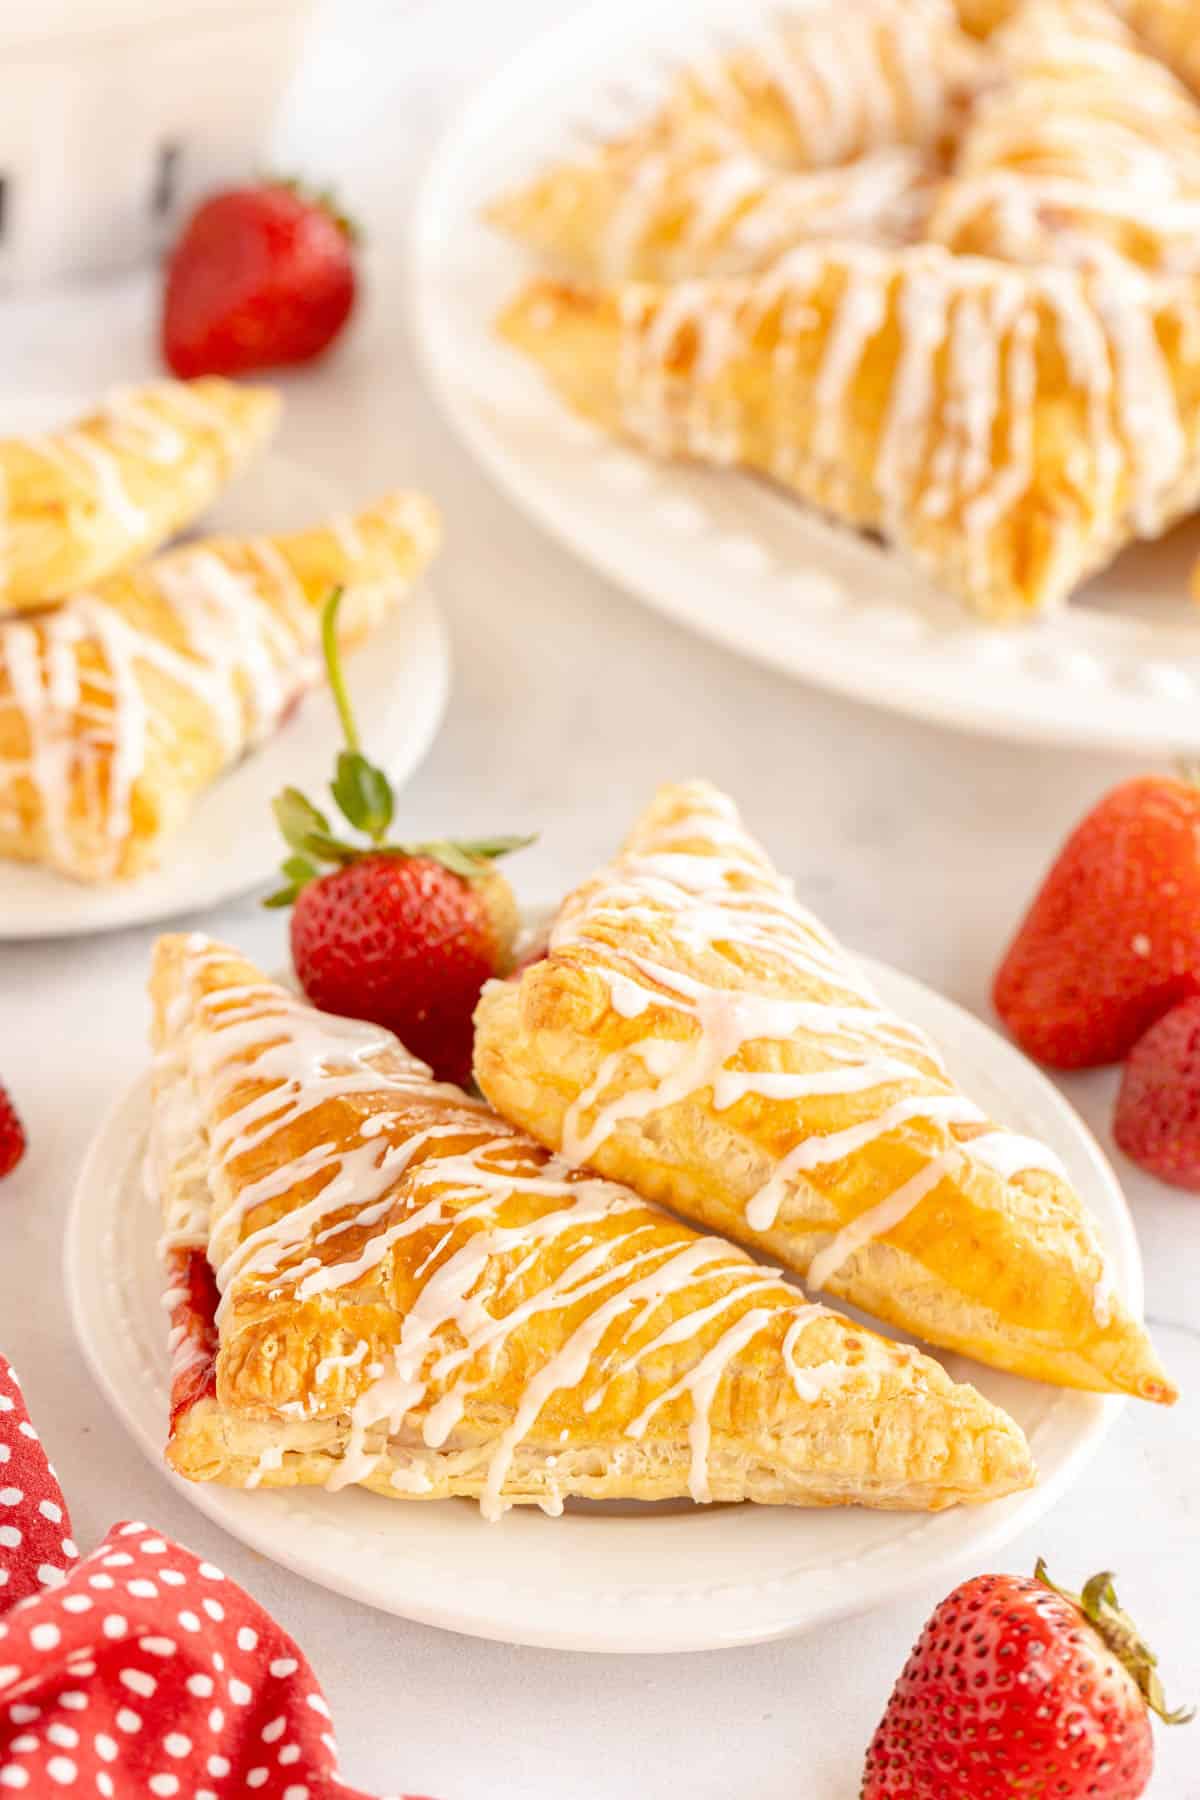 A plate of strawberry turnovers with icing on top.